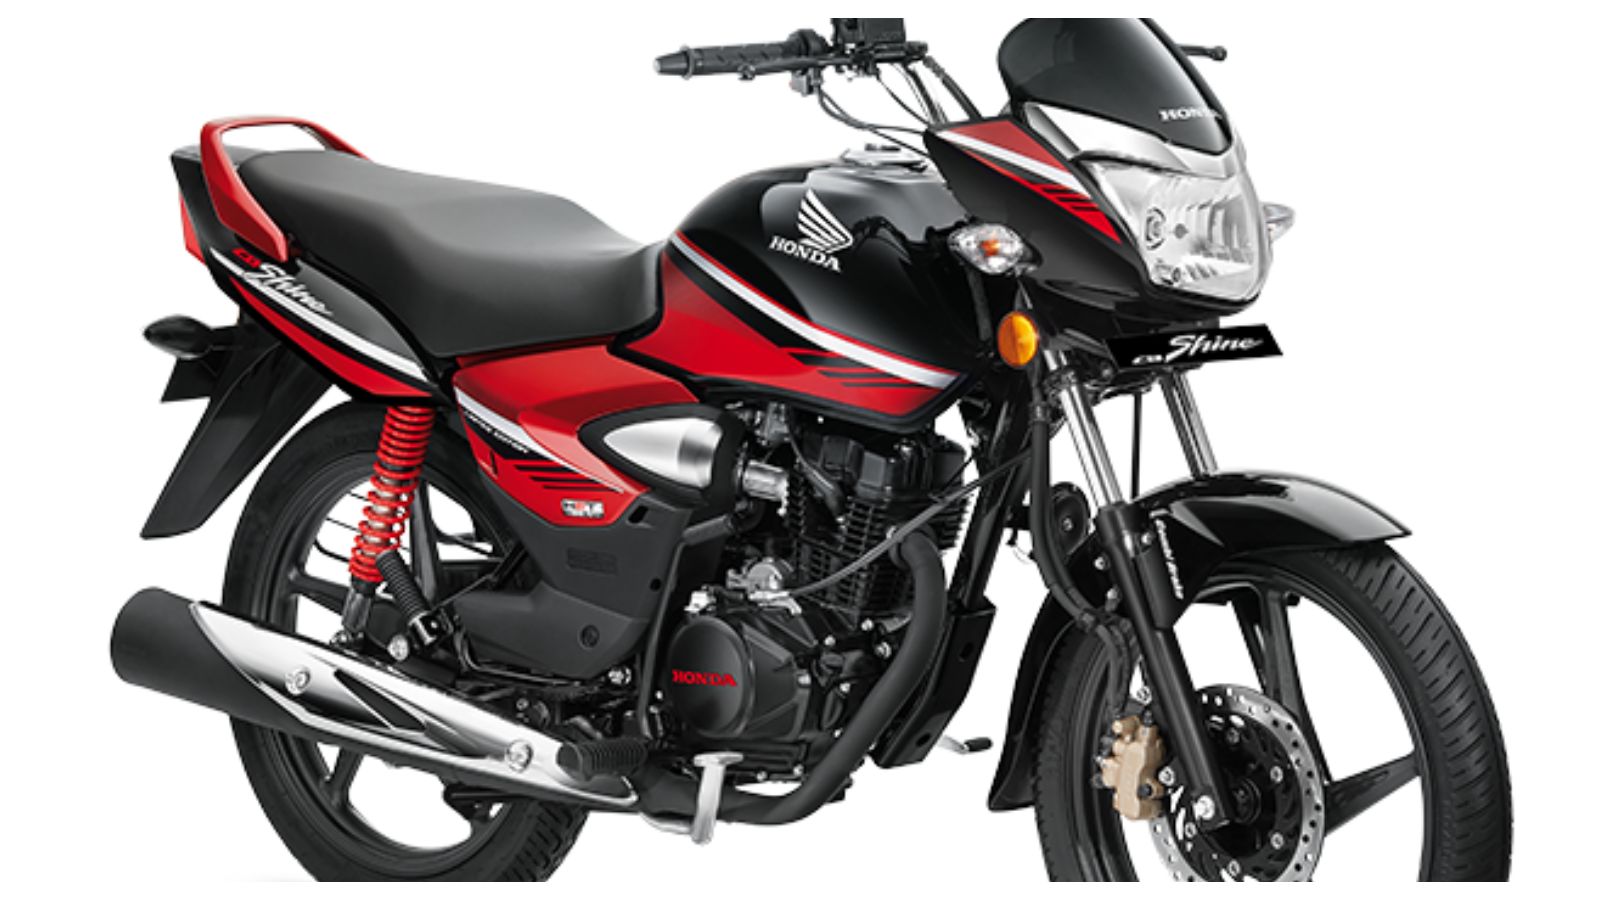 Limited Edition Cb Shine Has Been Launched At Inr 60 758 Ex Showroom Mumbai Motoroids